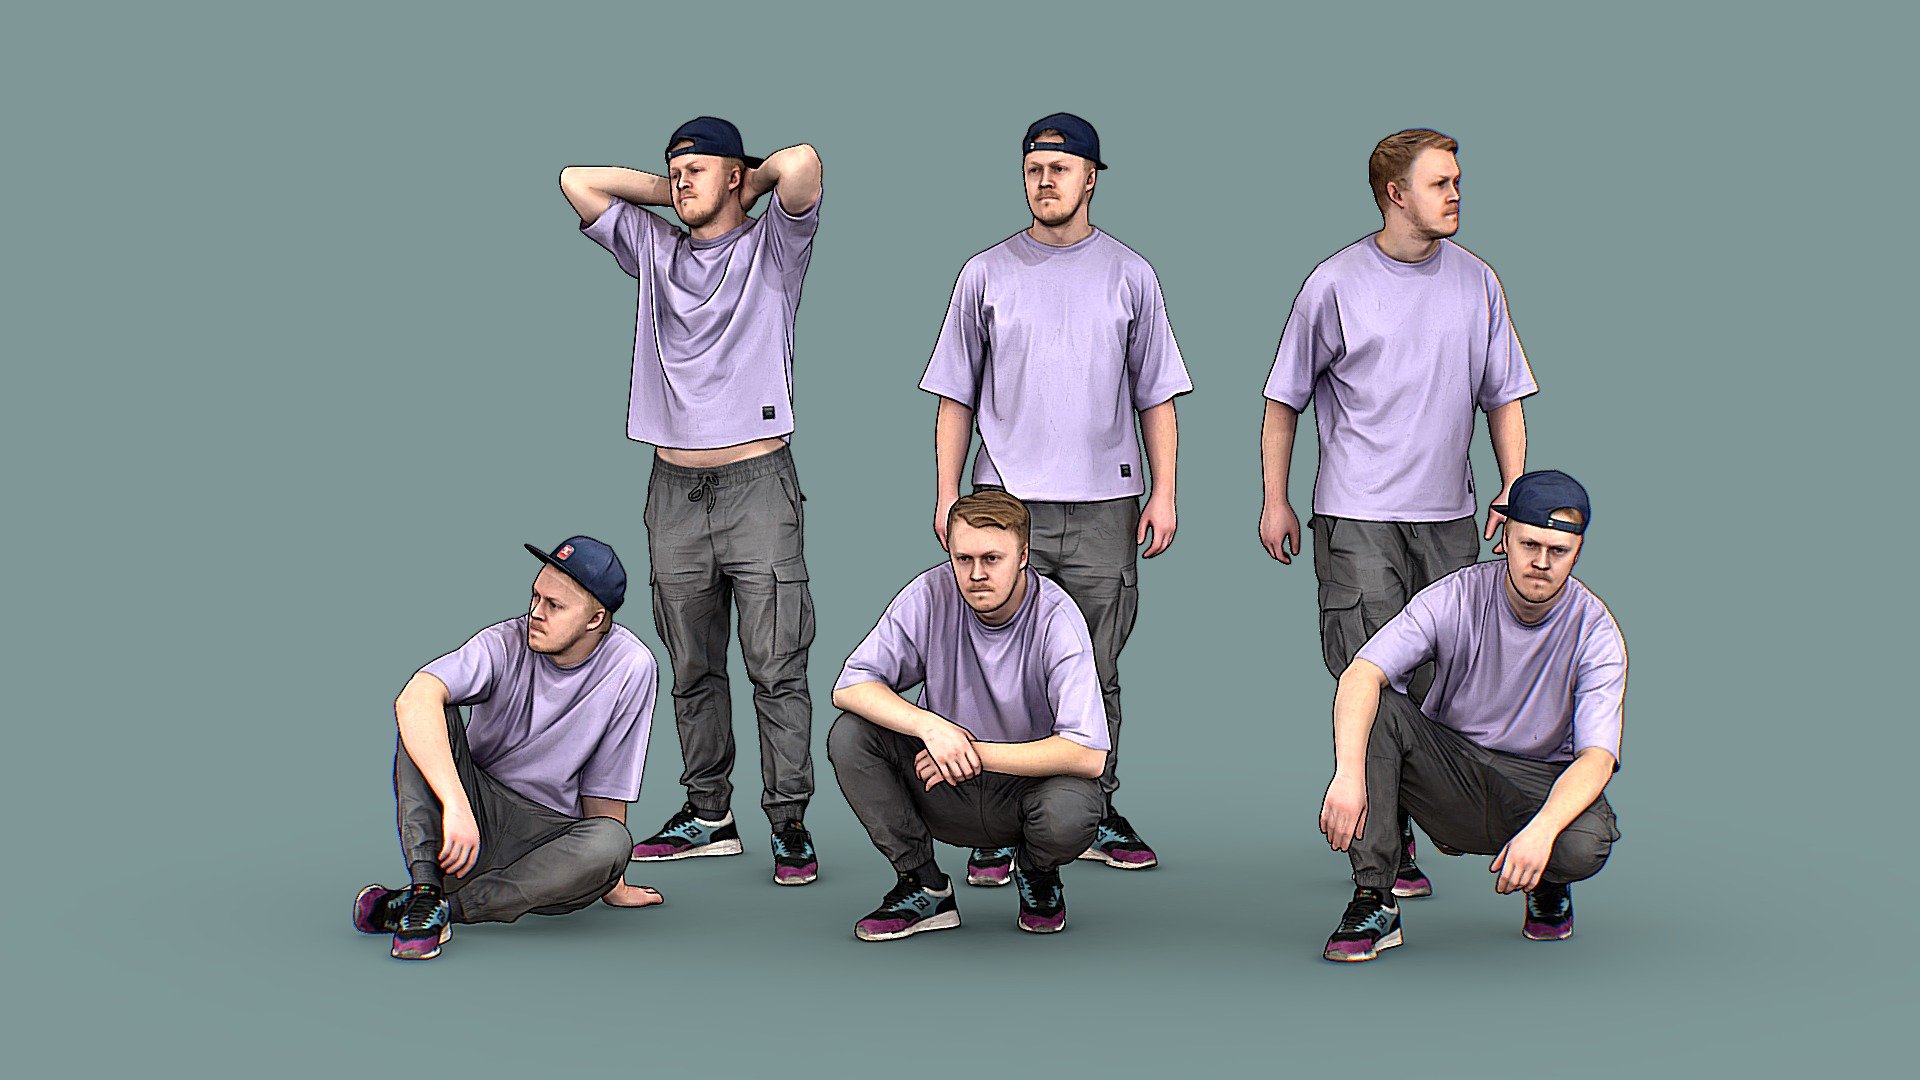 Follow us on instagram ✌🏼

✉️ Pack of 6 character models, a young man, a trendy guy of Scandinavian appearance in colored T-shirt and gray joggers.

🦾 This model will be an excellent participant in the general and long-range plans. You don’t need to zoom in and try to see the details, it reveals and demonstrates its texture as much as possible in case of a certain distance from the foreground.

⚙️ Stylized Character 3d model ready for Virtual Reality (VR), Augmented Reality (AR), games and other real-time apps. 50 000 polygons per model (if you use the border outline the polycount is doubled). Suitable for the architectural visualization and another graphical projects. Pack contains 5 character models 3d model